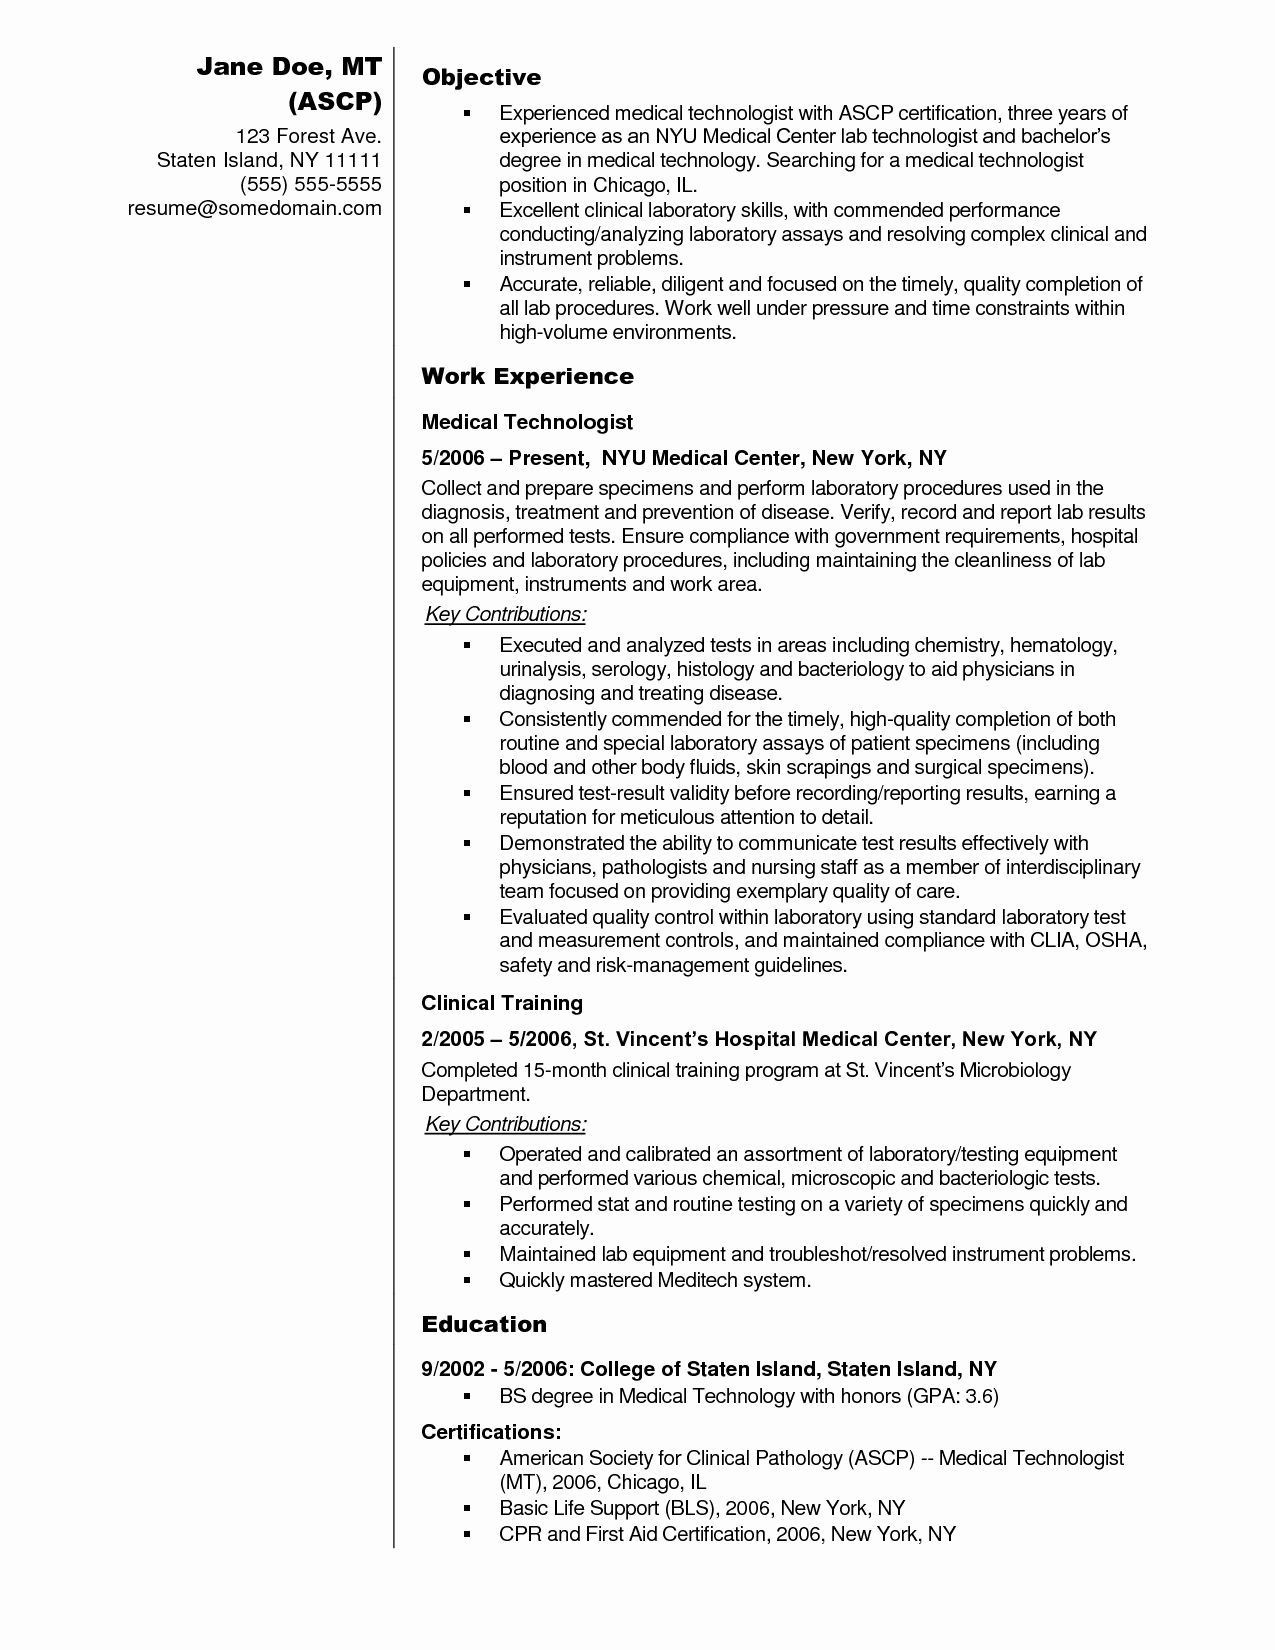 Sample Resume Of Medical Technologist Philippines American College Of Medical Technology Resume Examples, Medical …